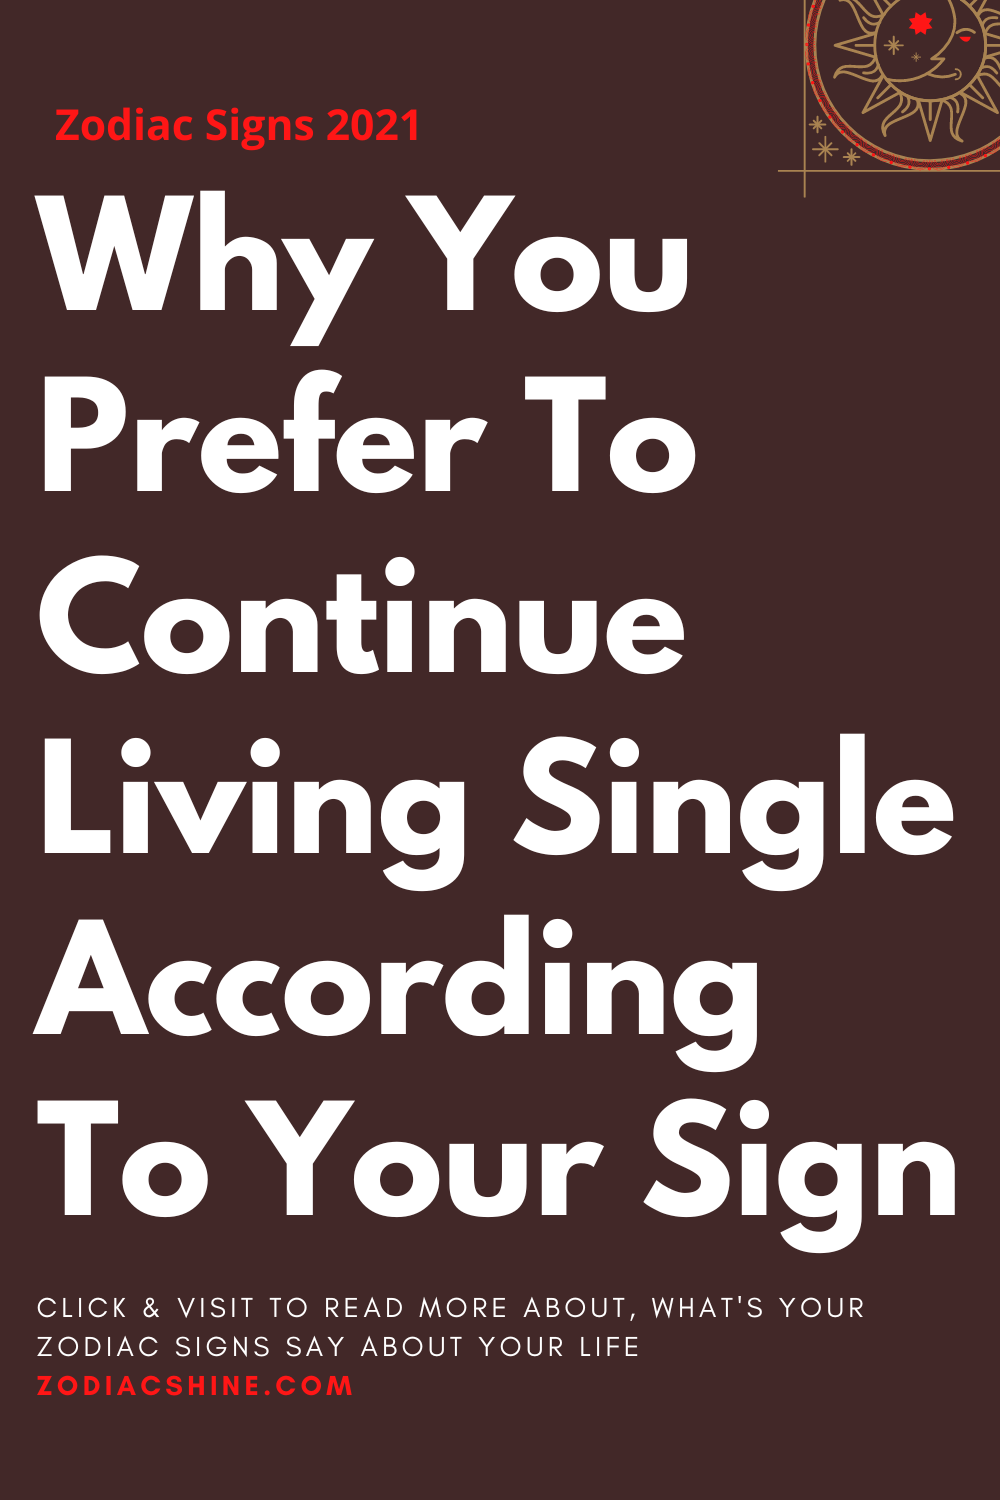 Why You Prefer To Continue Living Single According To Your Sign